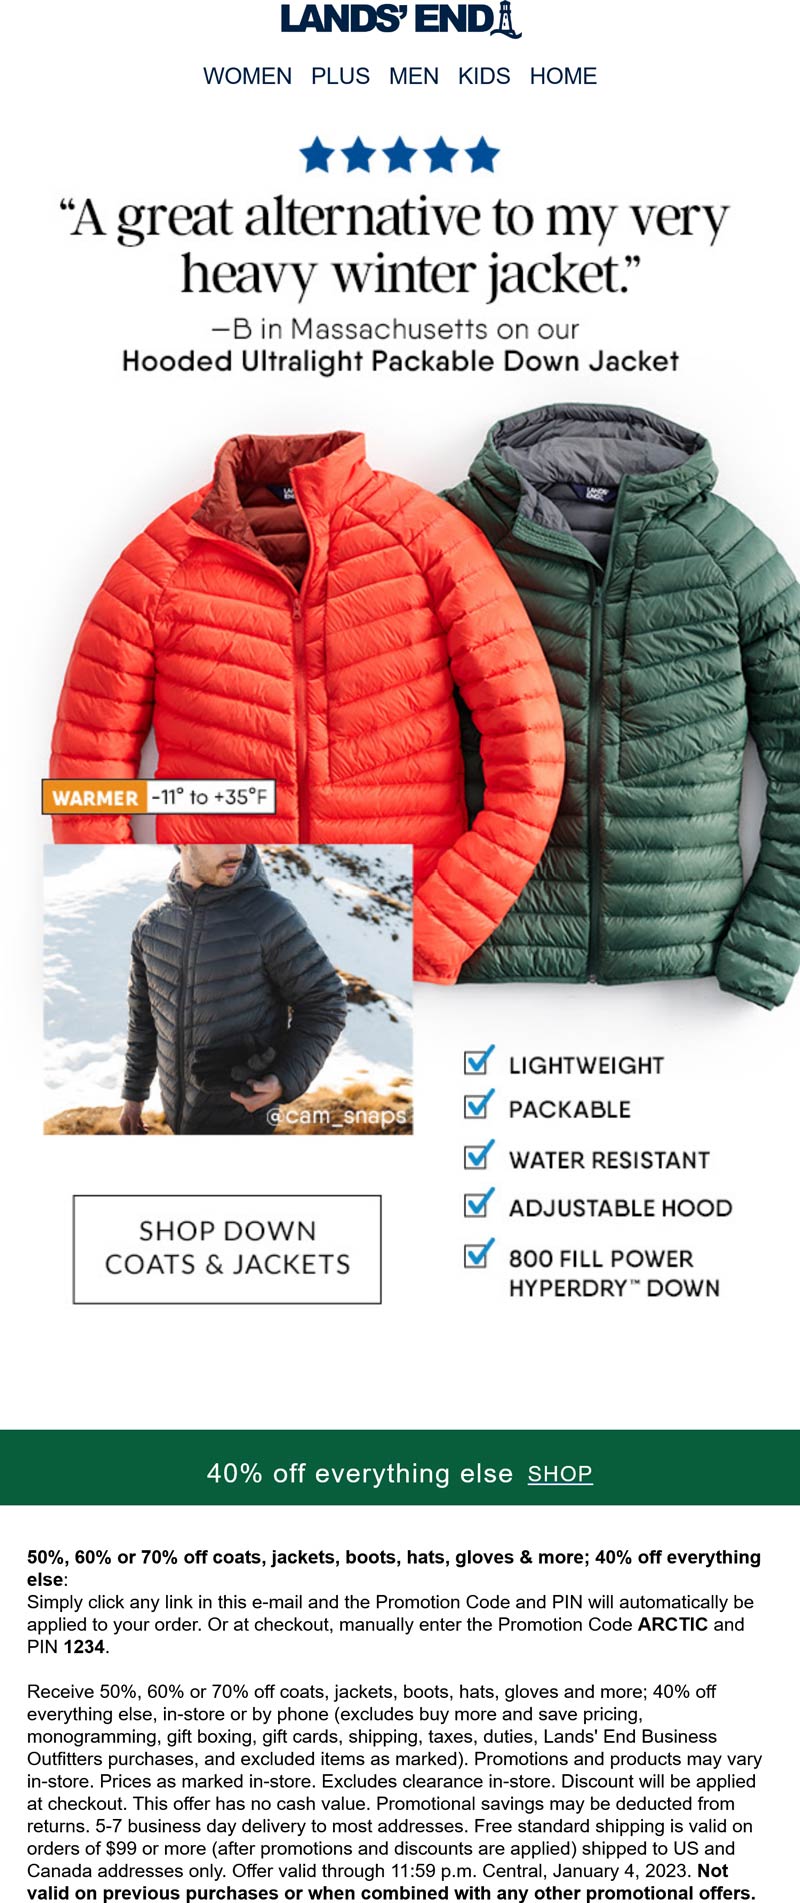 Lands End stores Coupon  40% off everything & more today at Lands End via promo code ARCTIC and pin 1234 #landsend 